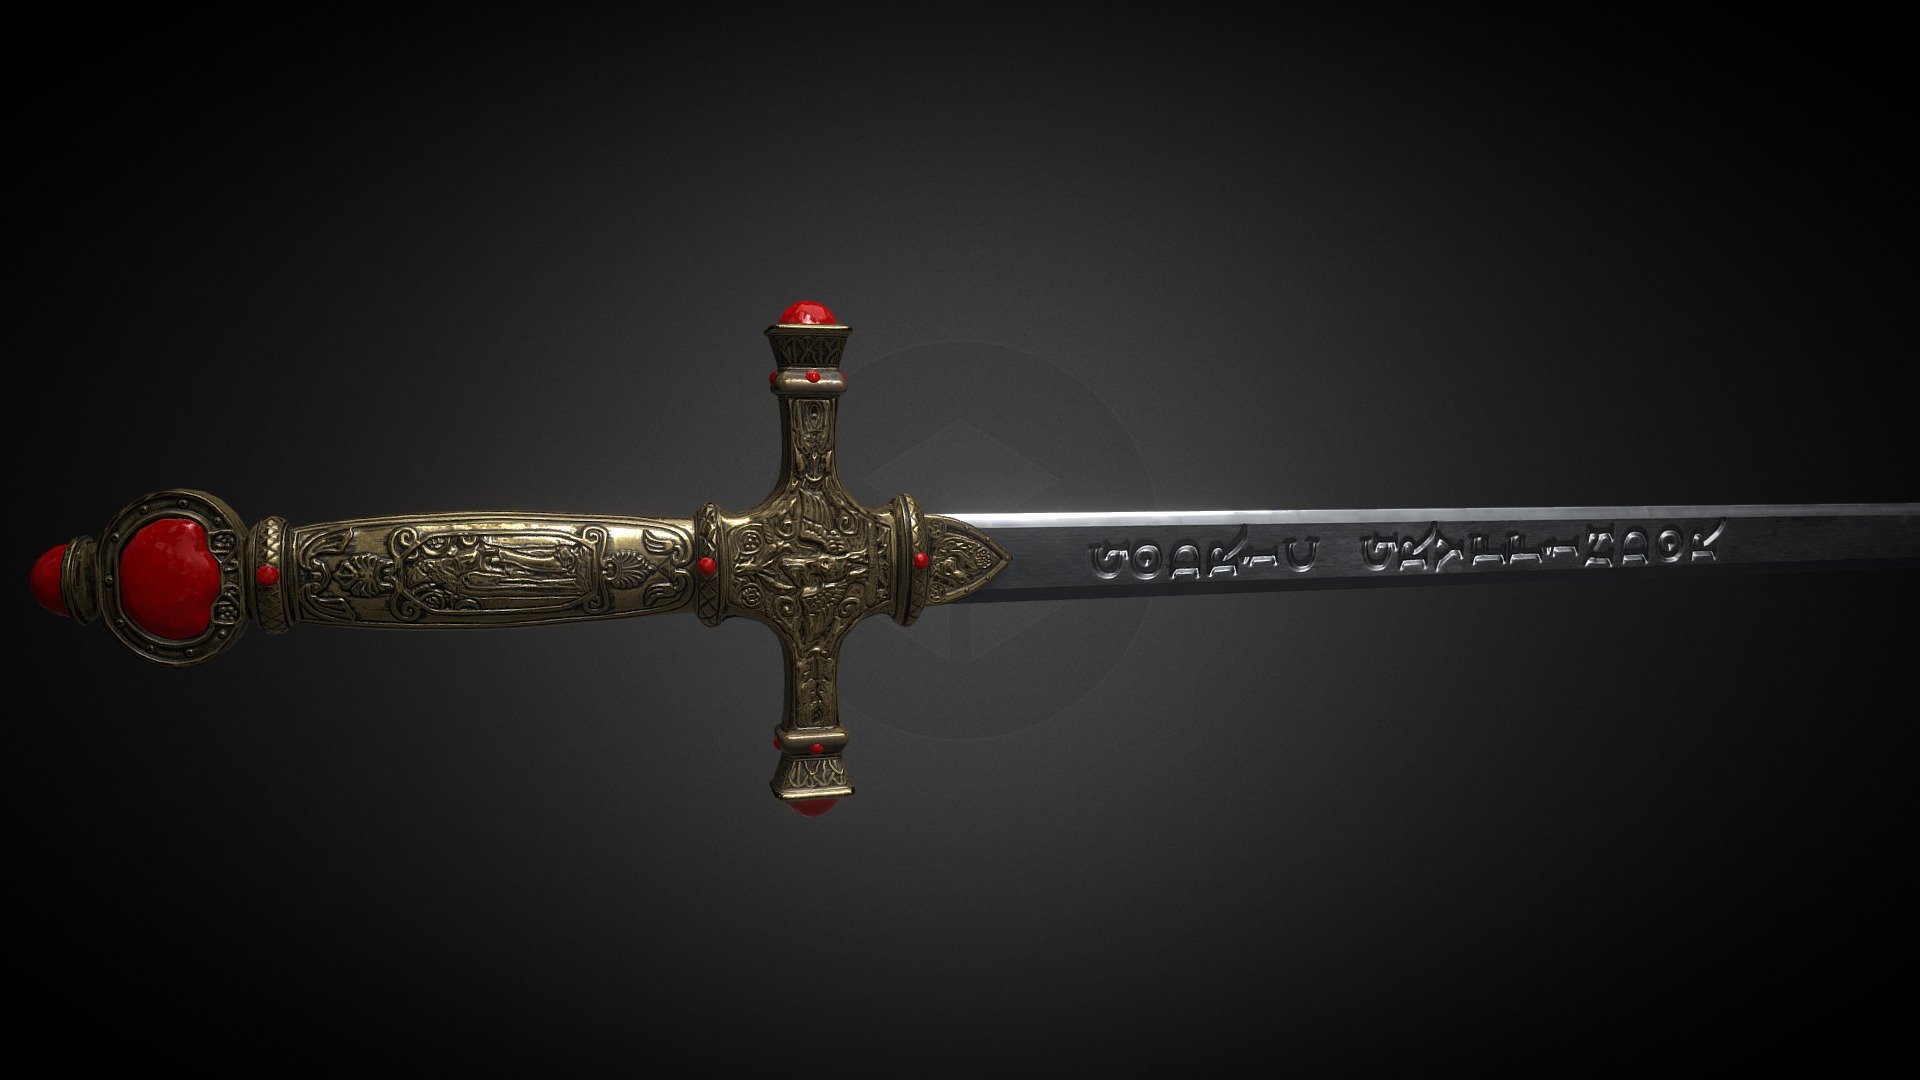 Final asset I made for my GoldenAxe art test for University. This shortsowrd I based on the Sword of Gryffindor, using a range of modelling, texturing and sculpting techniques 3d model